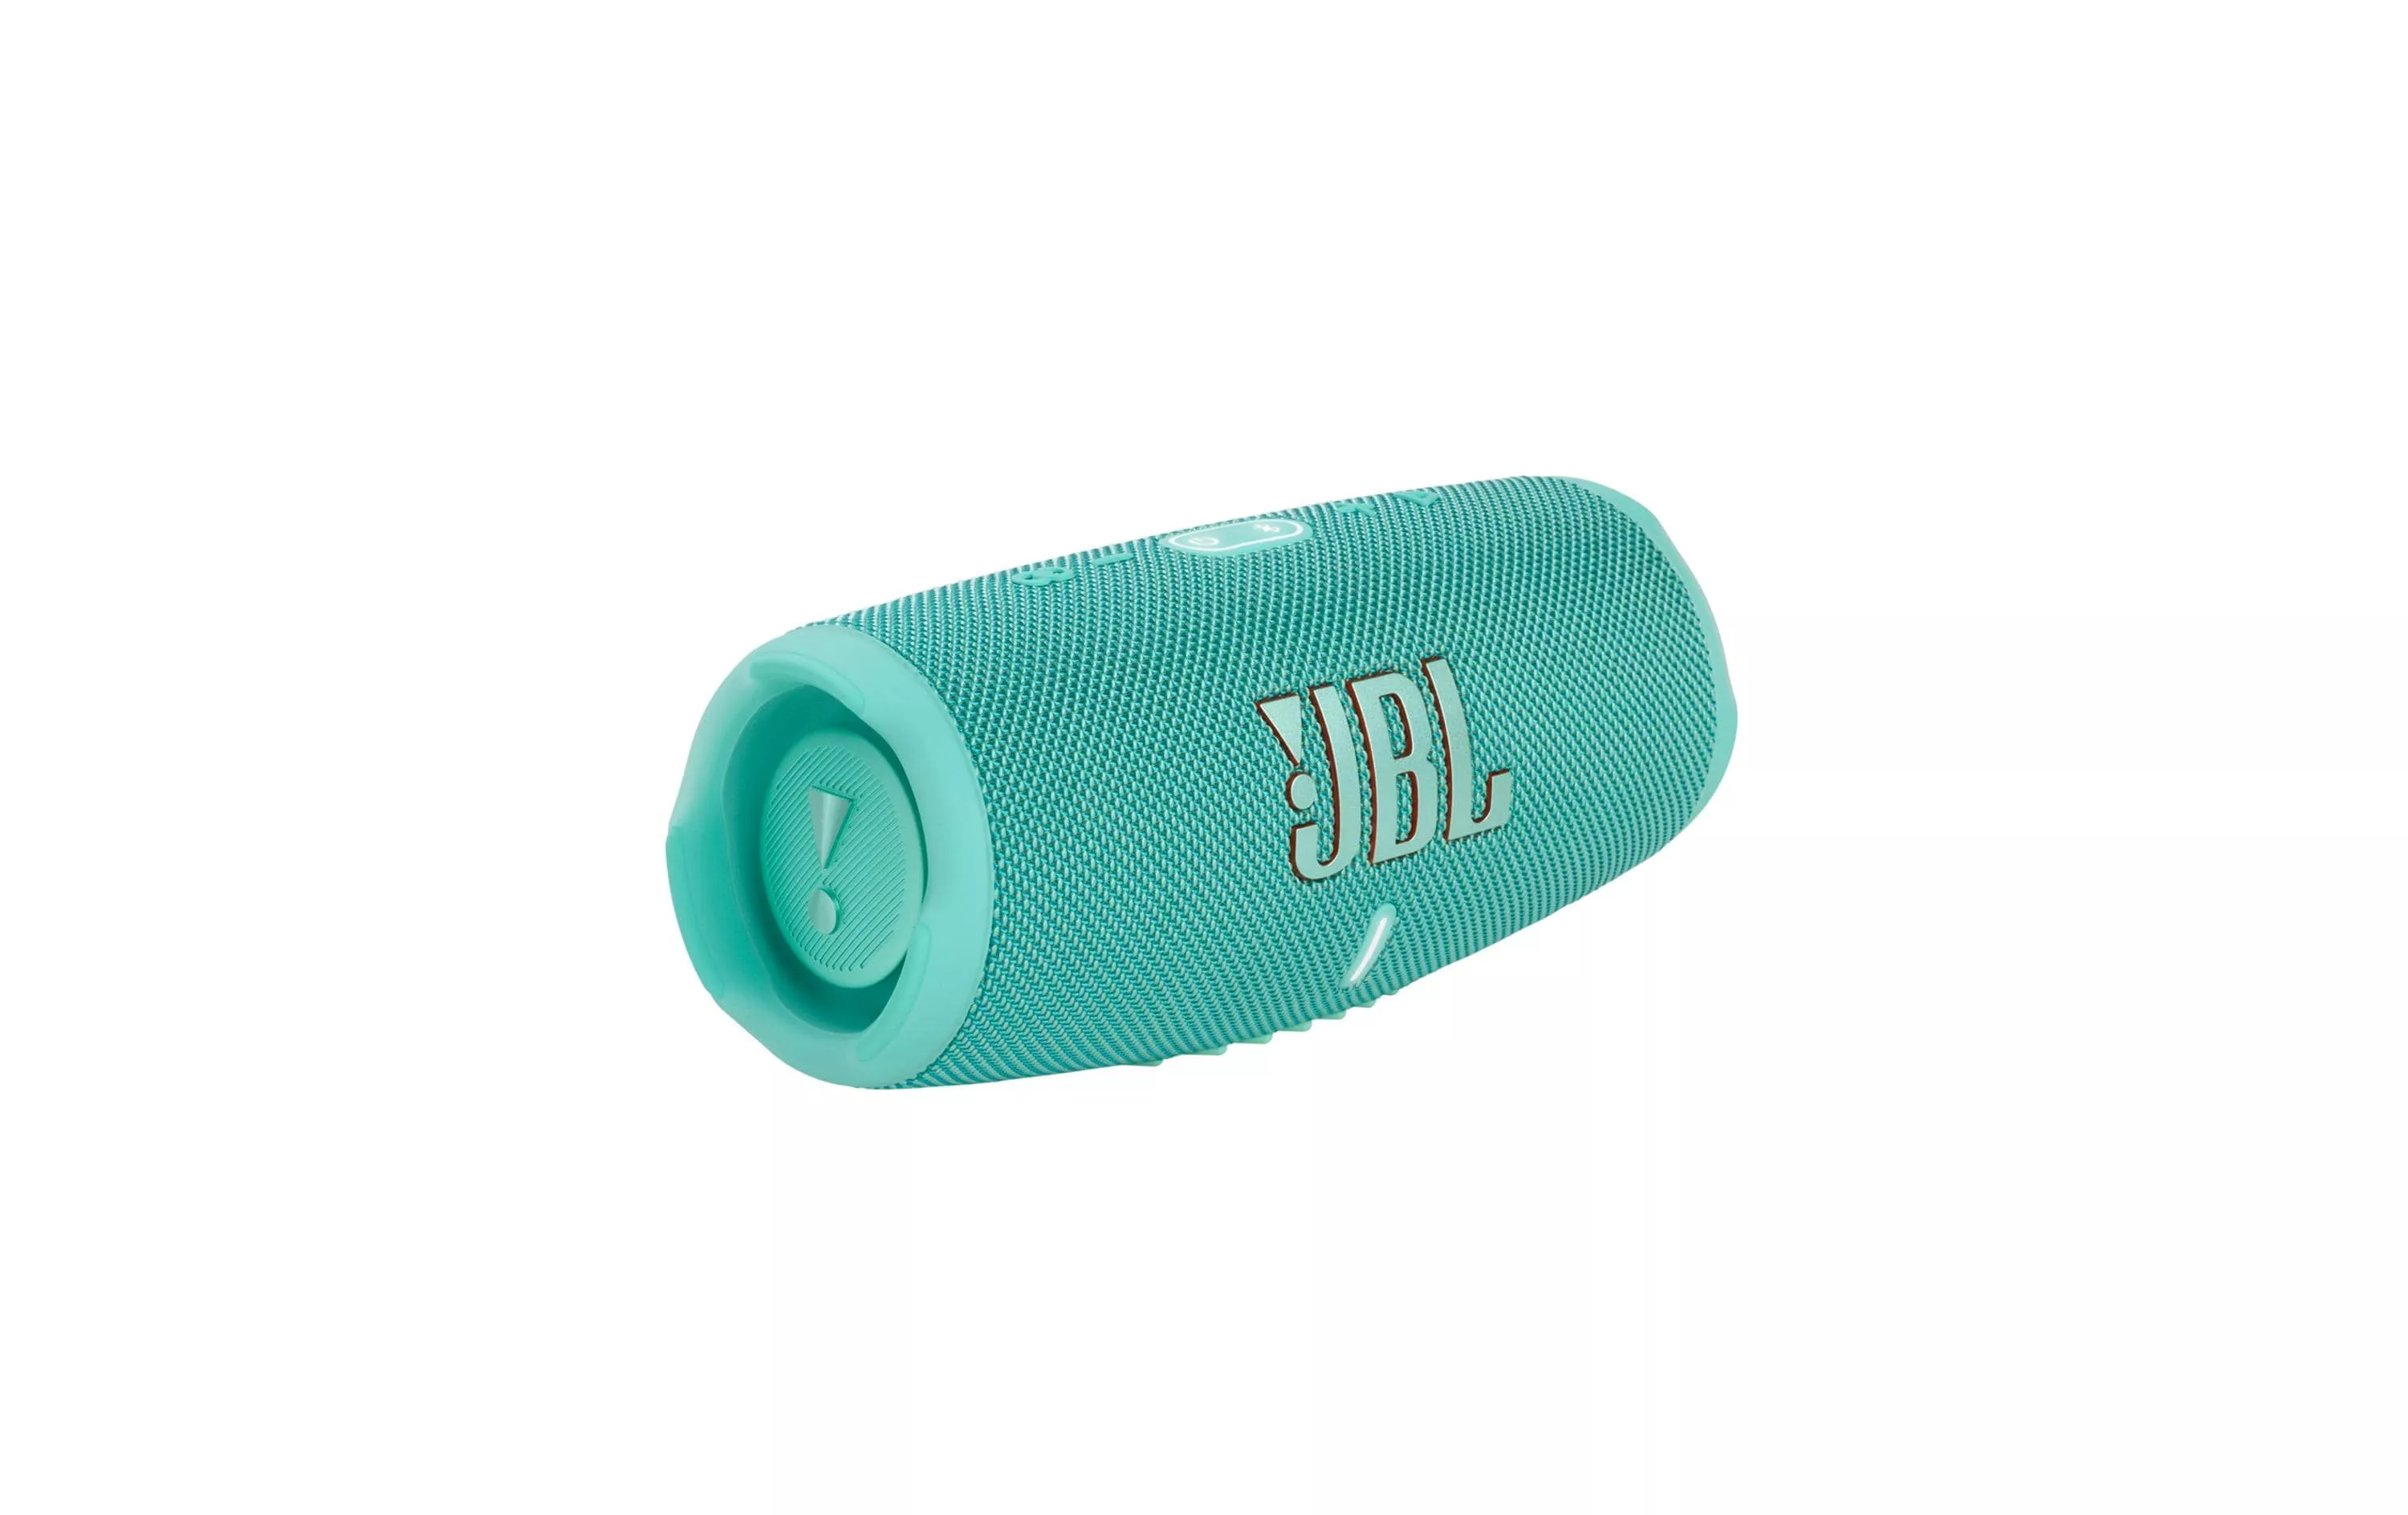 Altoparlante Bluetooth JBL Charge 5 Turchese